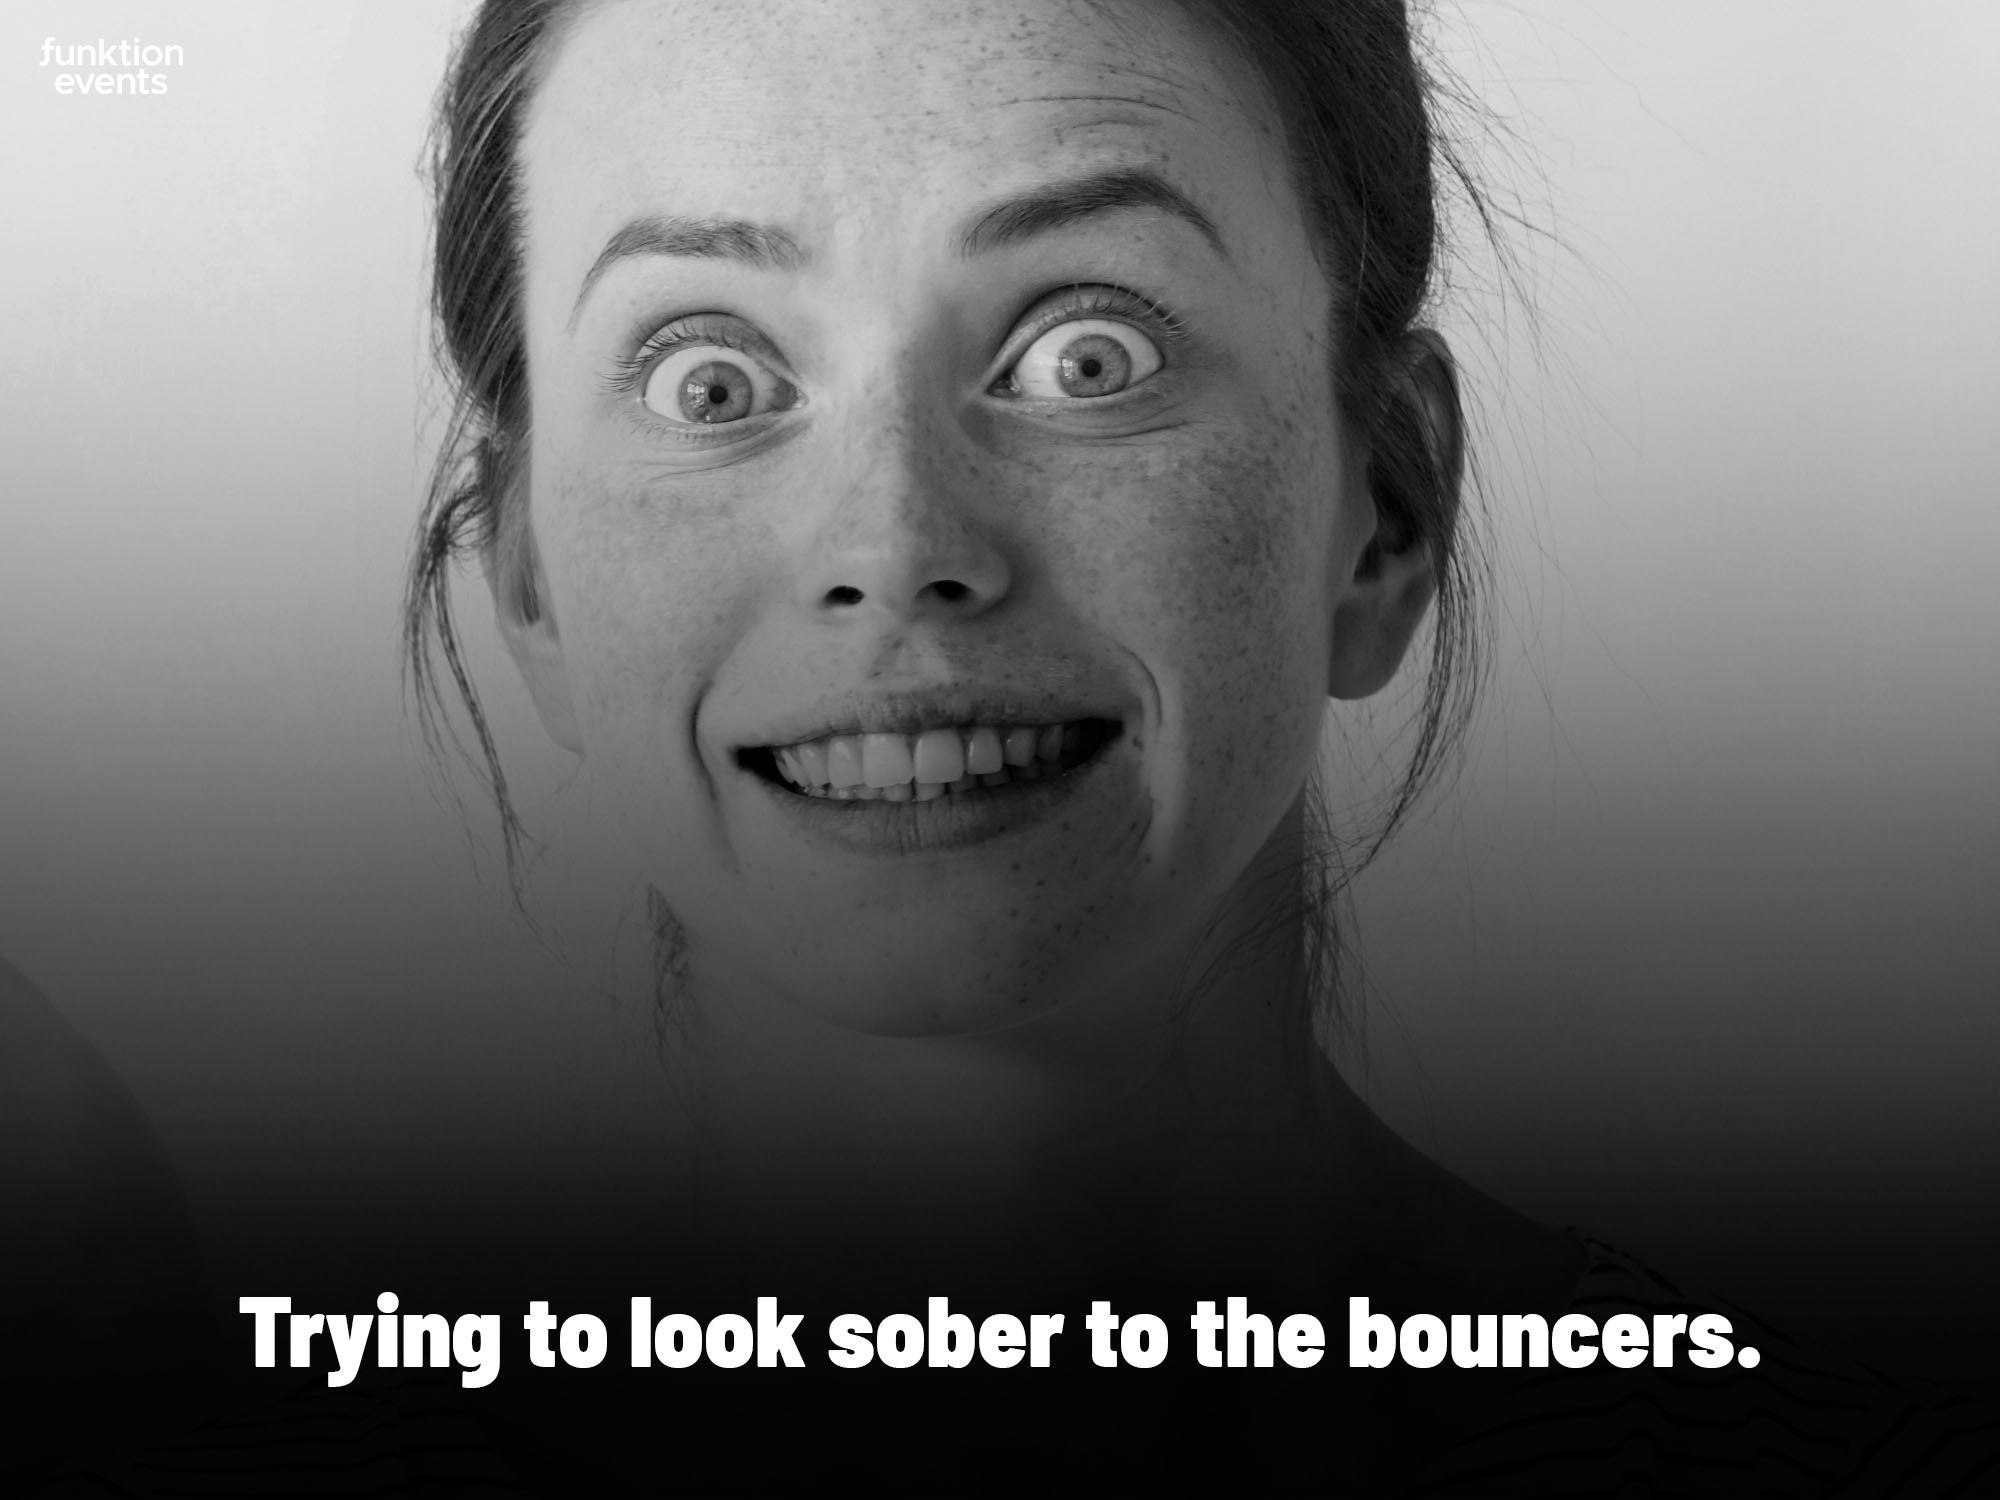 Trying to look sober to the bouncers - Meme 5